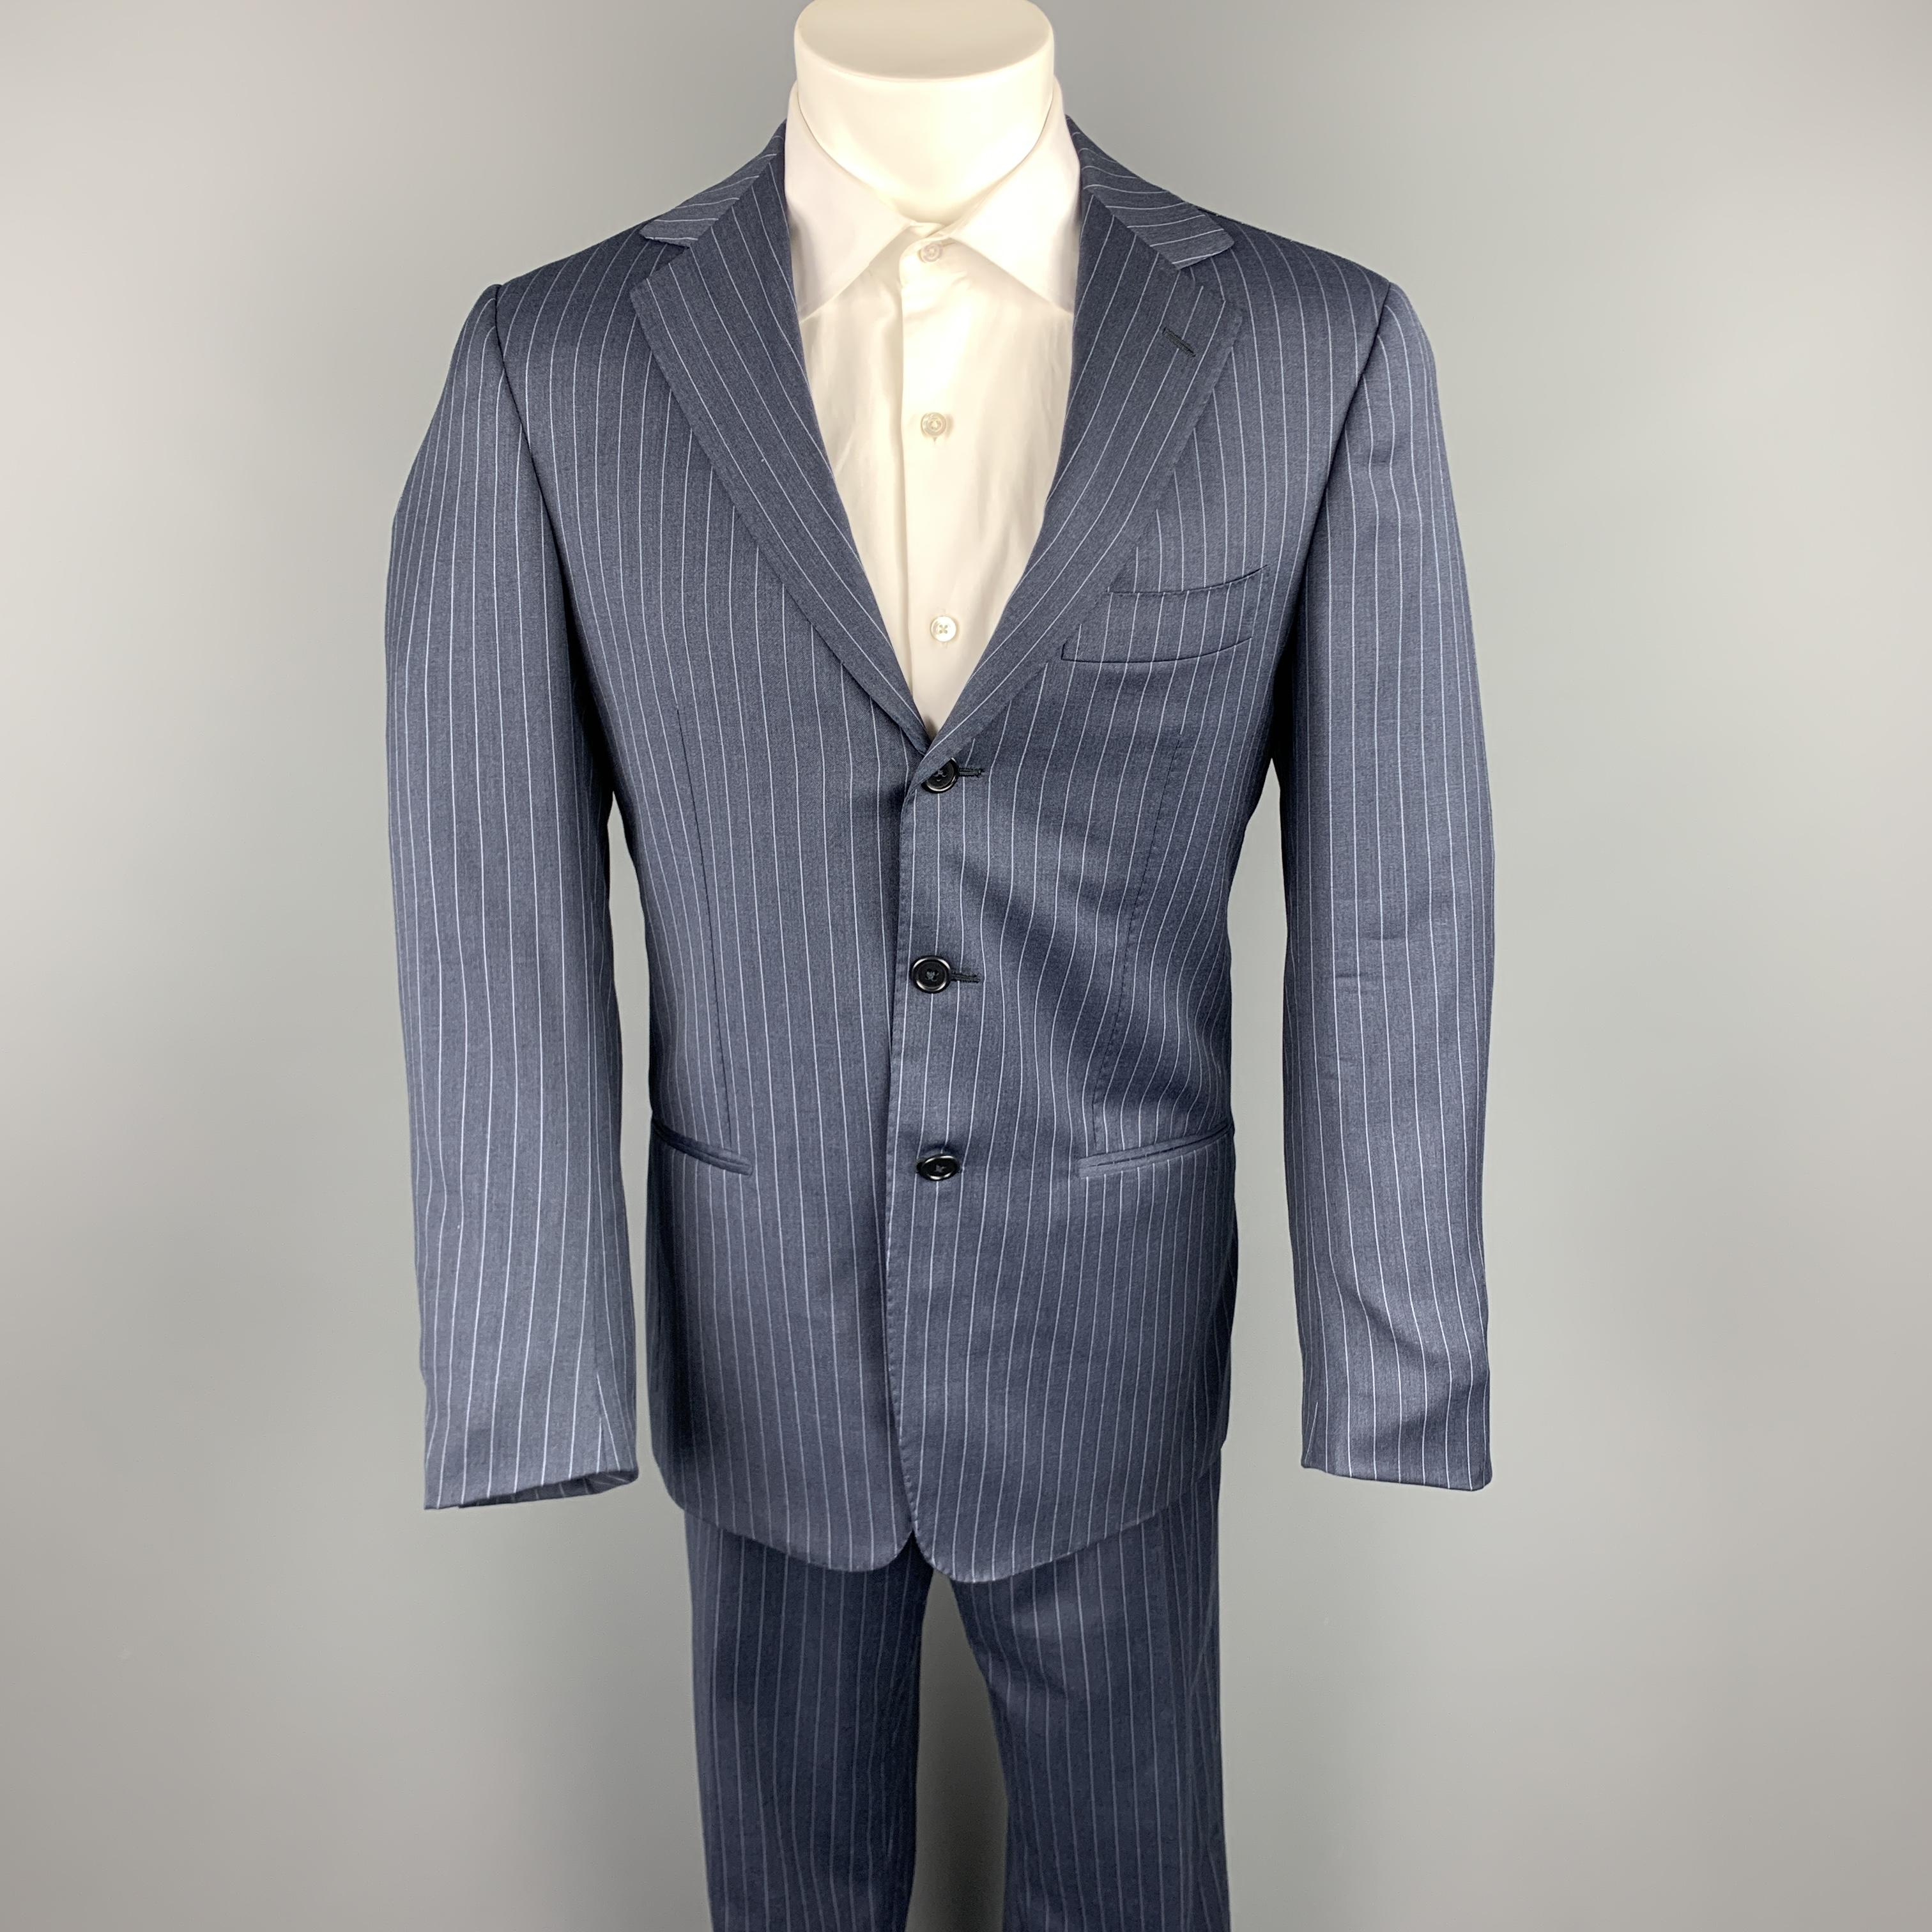 BORRELLI suit comes in a navy stripe wool and includes a single breasted, three button sport coat with notch lapel and matching flat front trousers. Made in Italy.

Excellent Pre-Owned Condition.
Marked: IT 48

Measurements:

-Jacket
Shoulder: 15.5